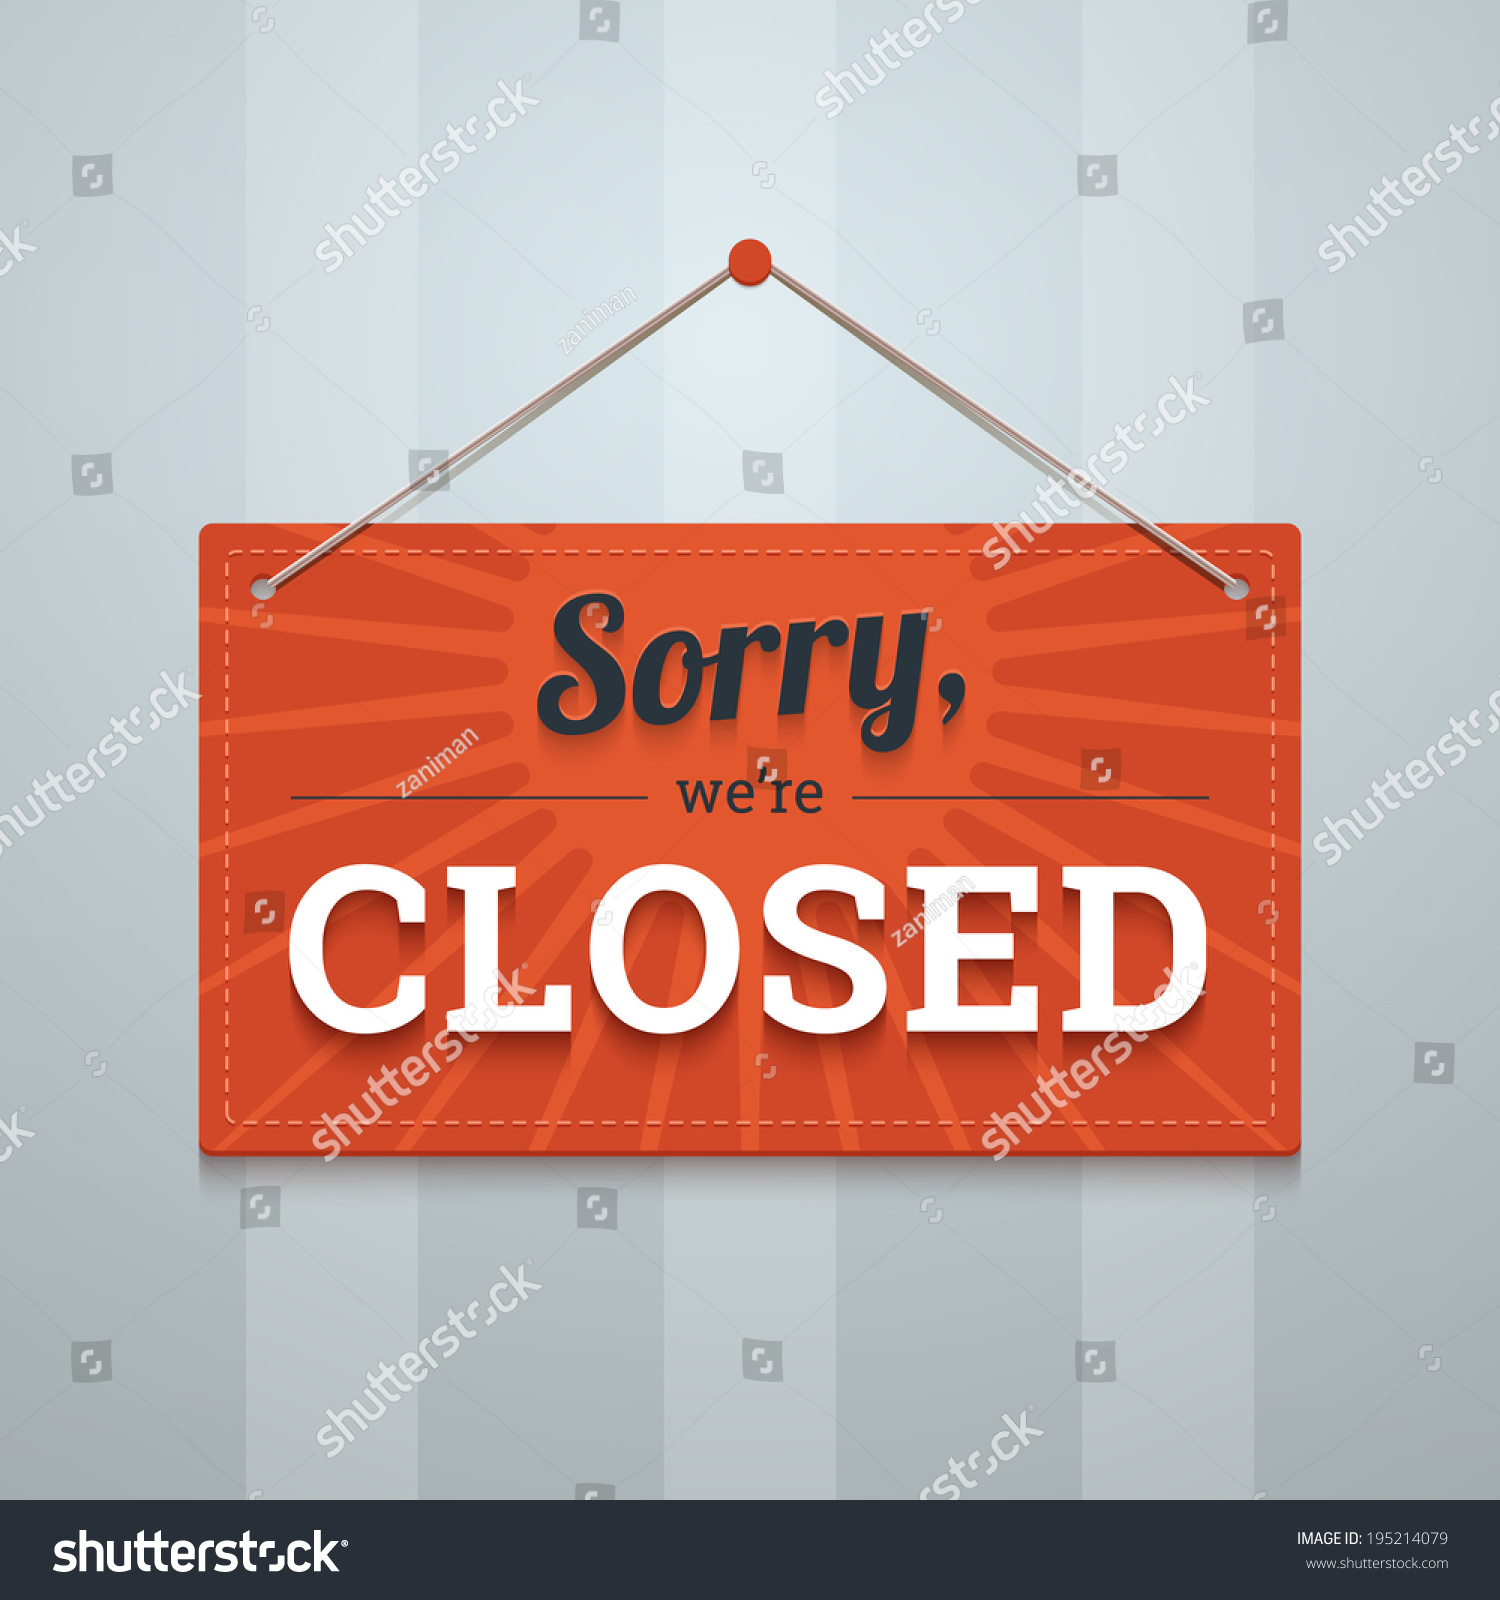 Sorry we are closed red sign on a wall. Flat style vector illustration in EPS10. #195214079